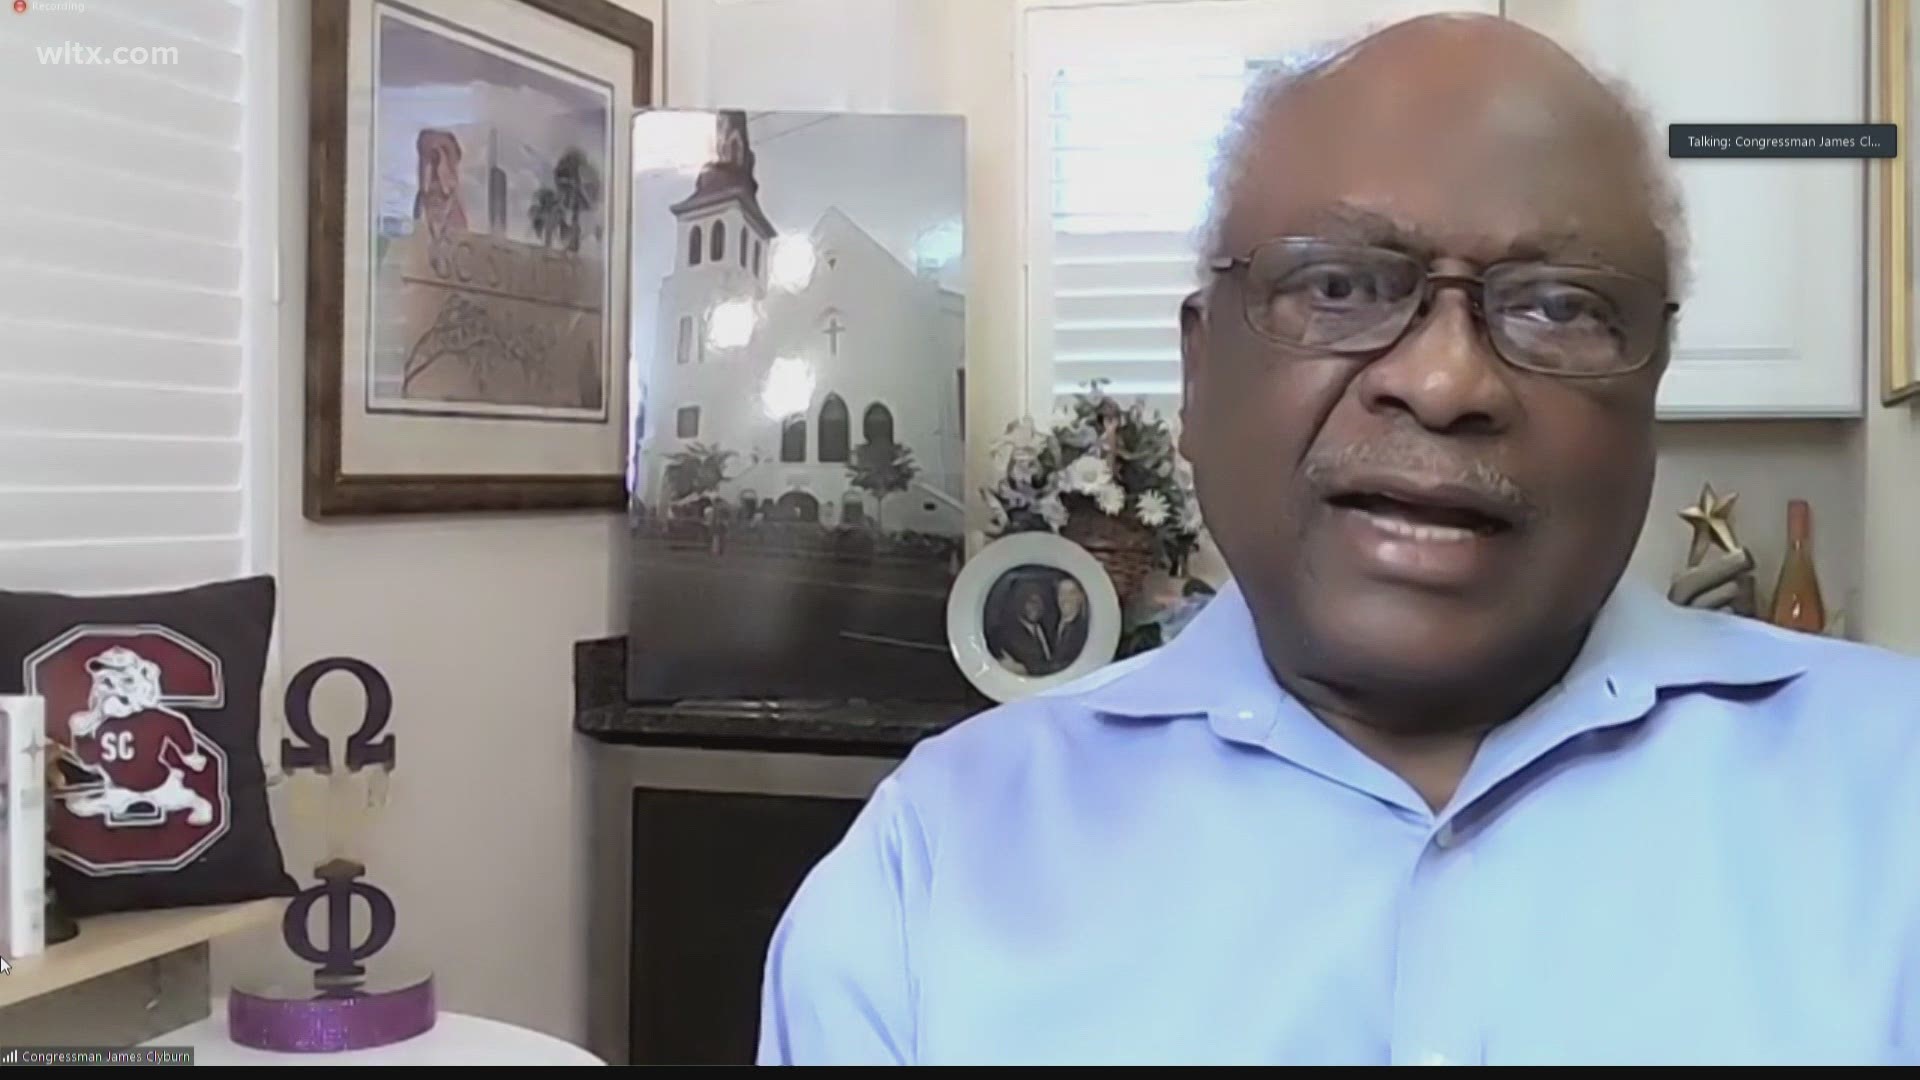 US Rep. James Clyburn said either the 25th Amendment or impeachment should be use to remove Donald Trump from office.